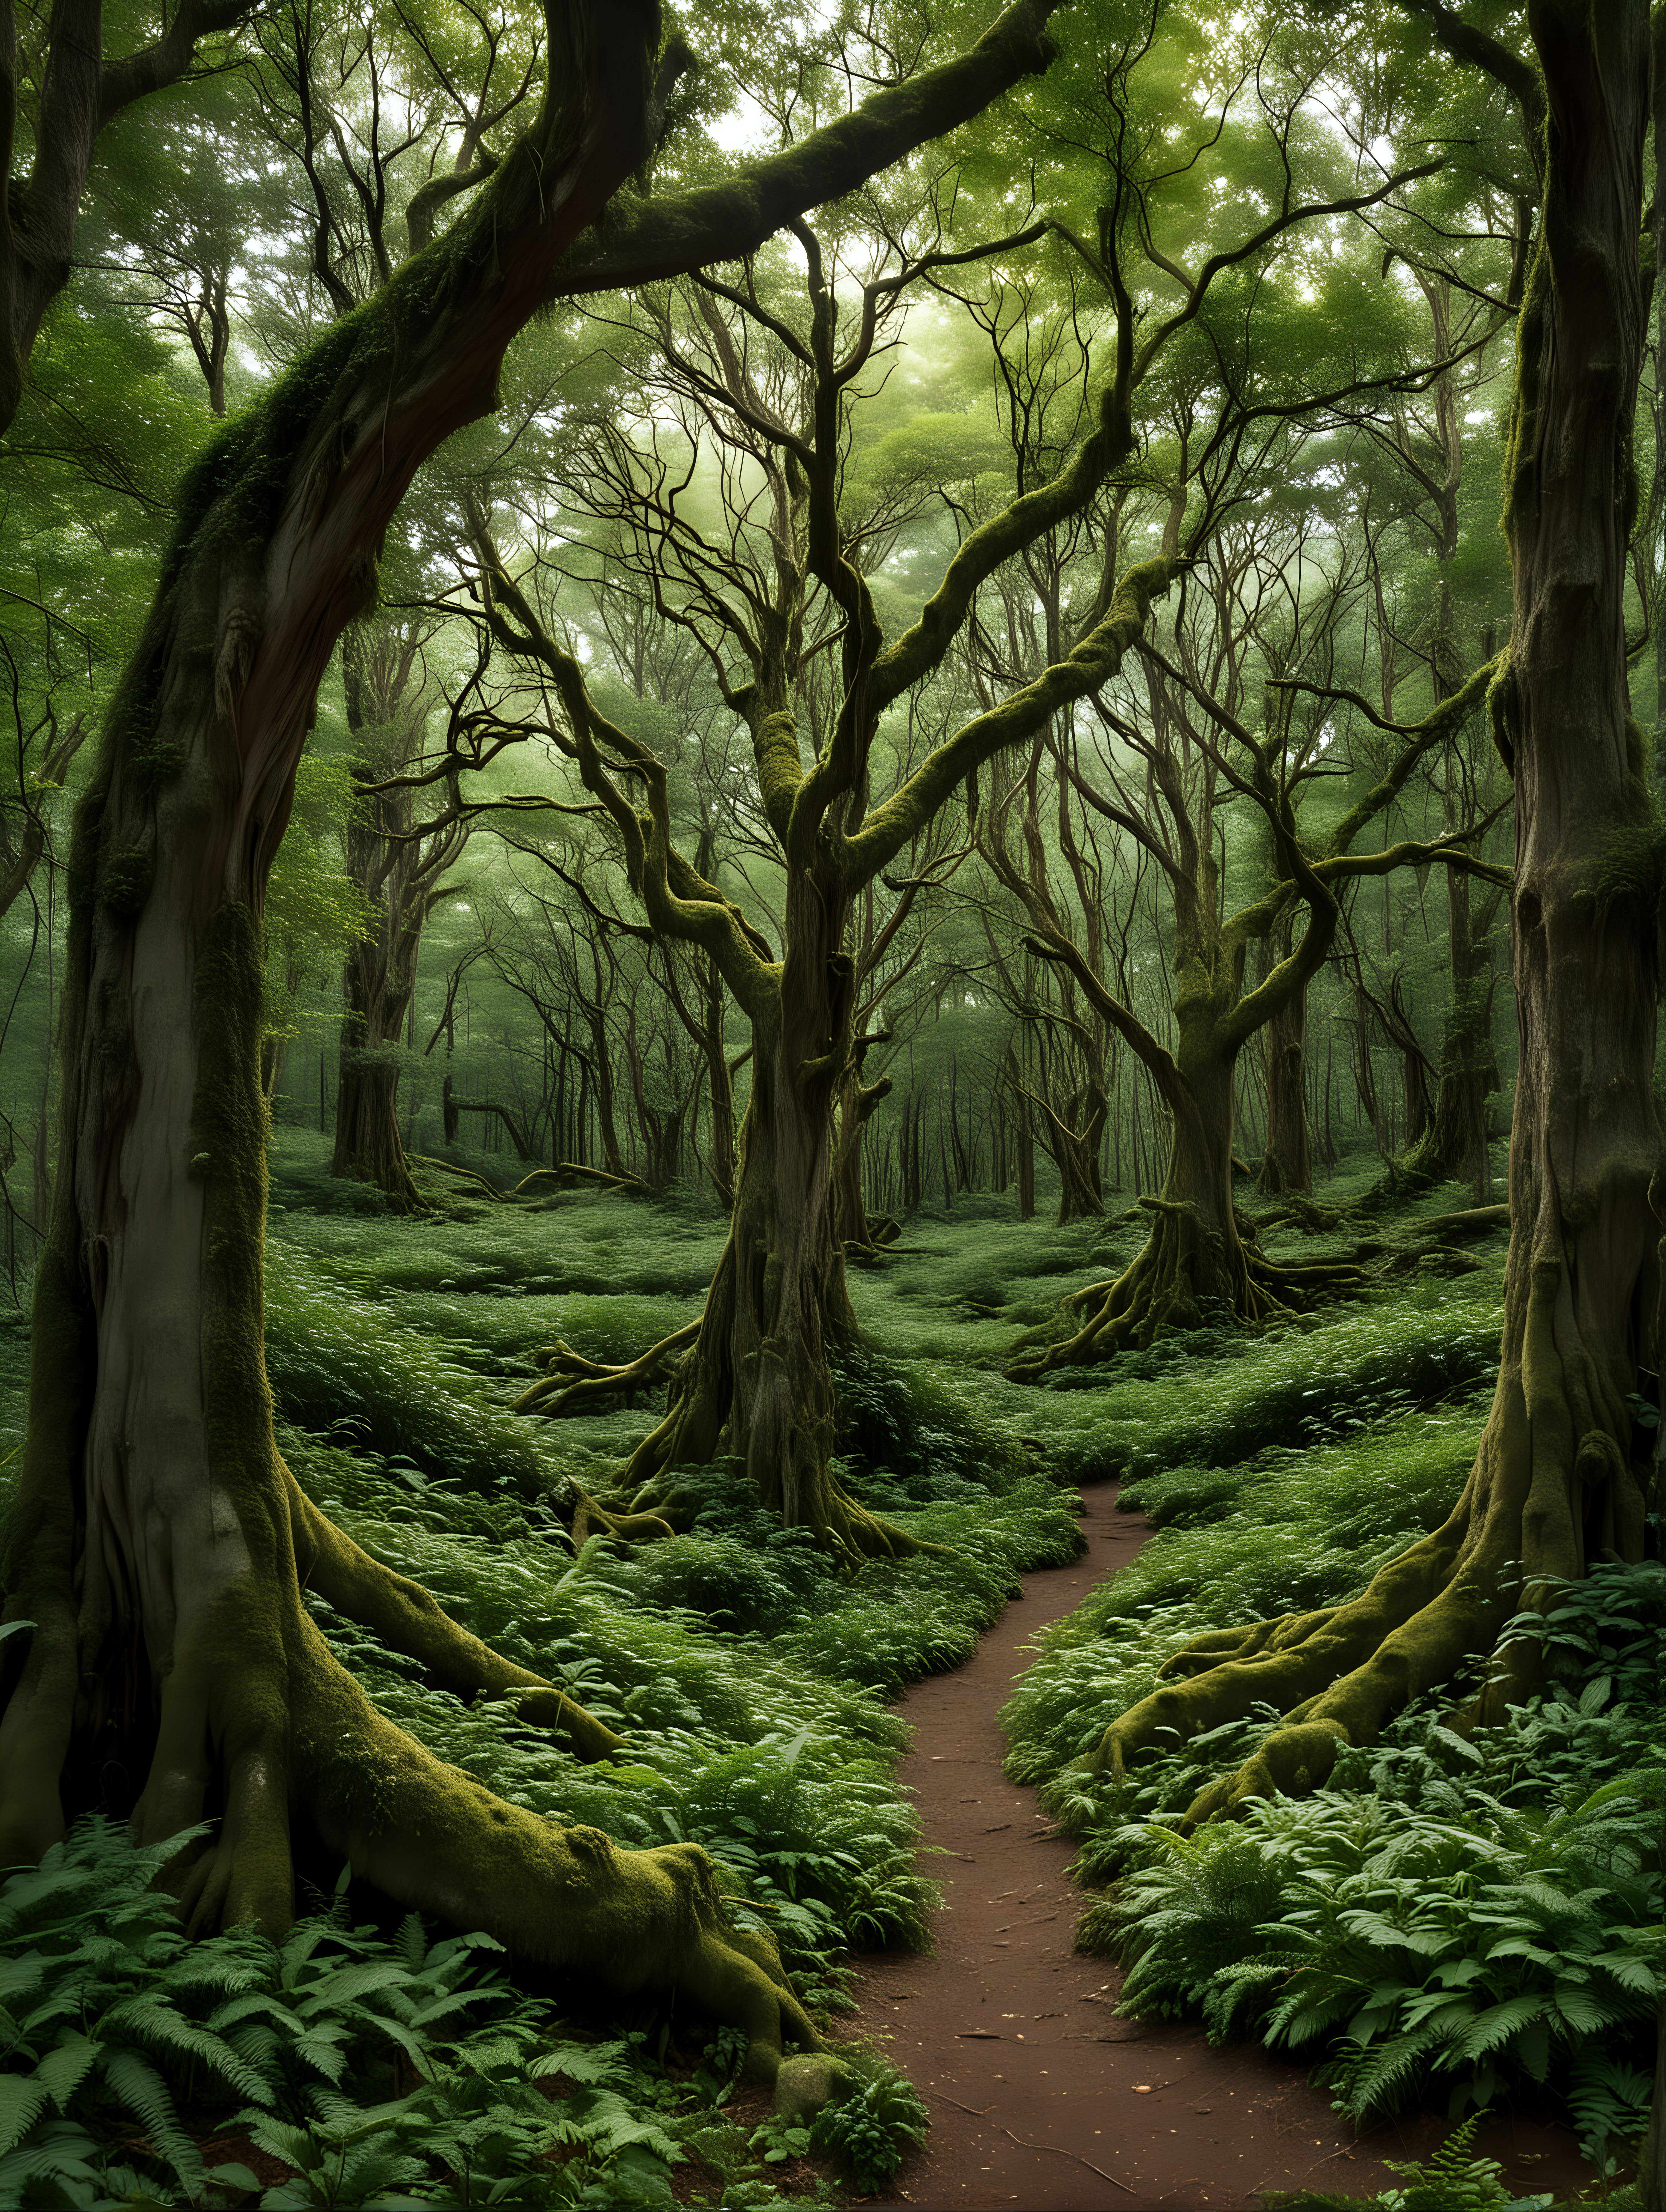 Enchanted Magic Forest with Ancient Bent Trees and Impenetrable Canopy